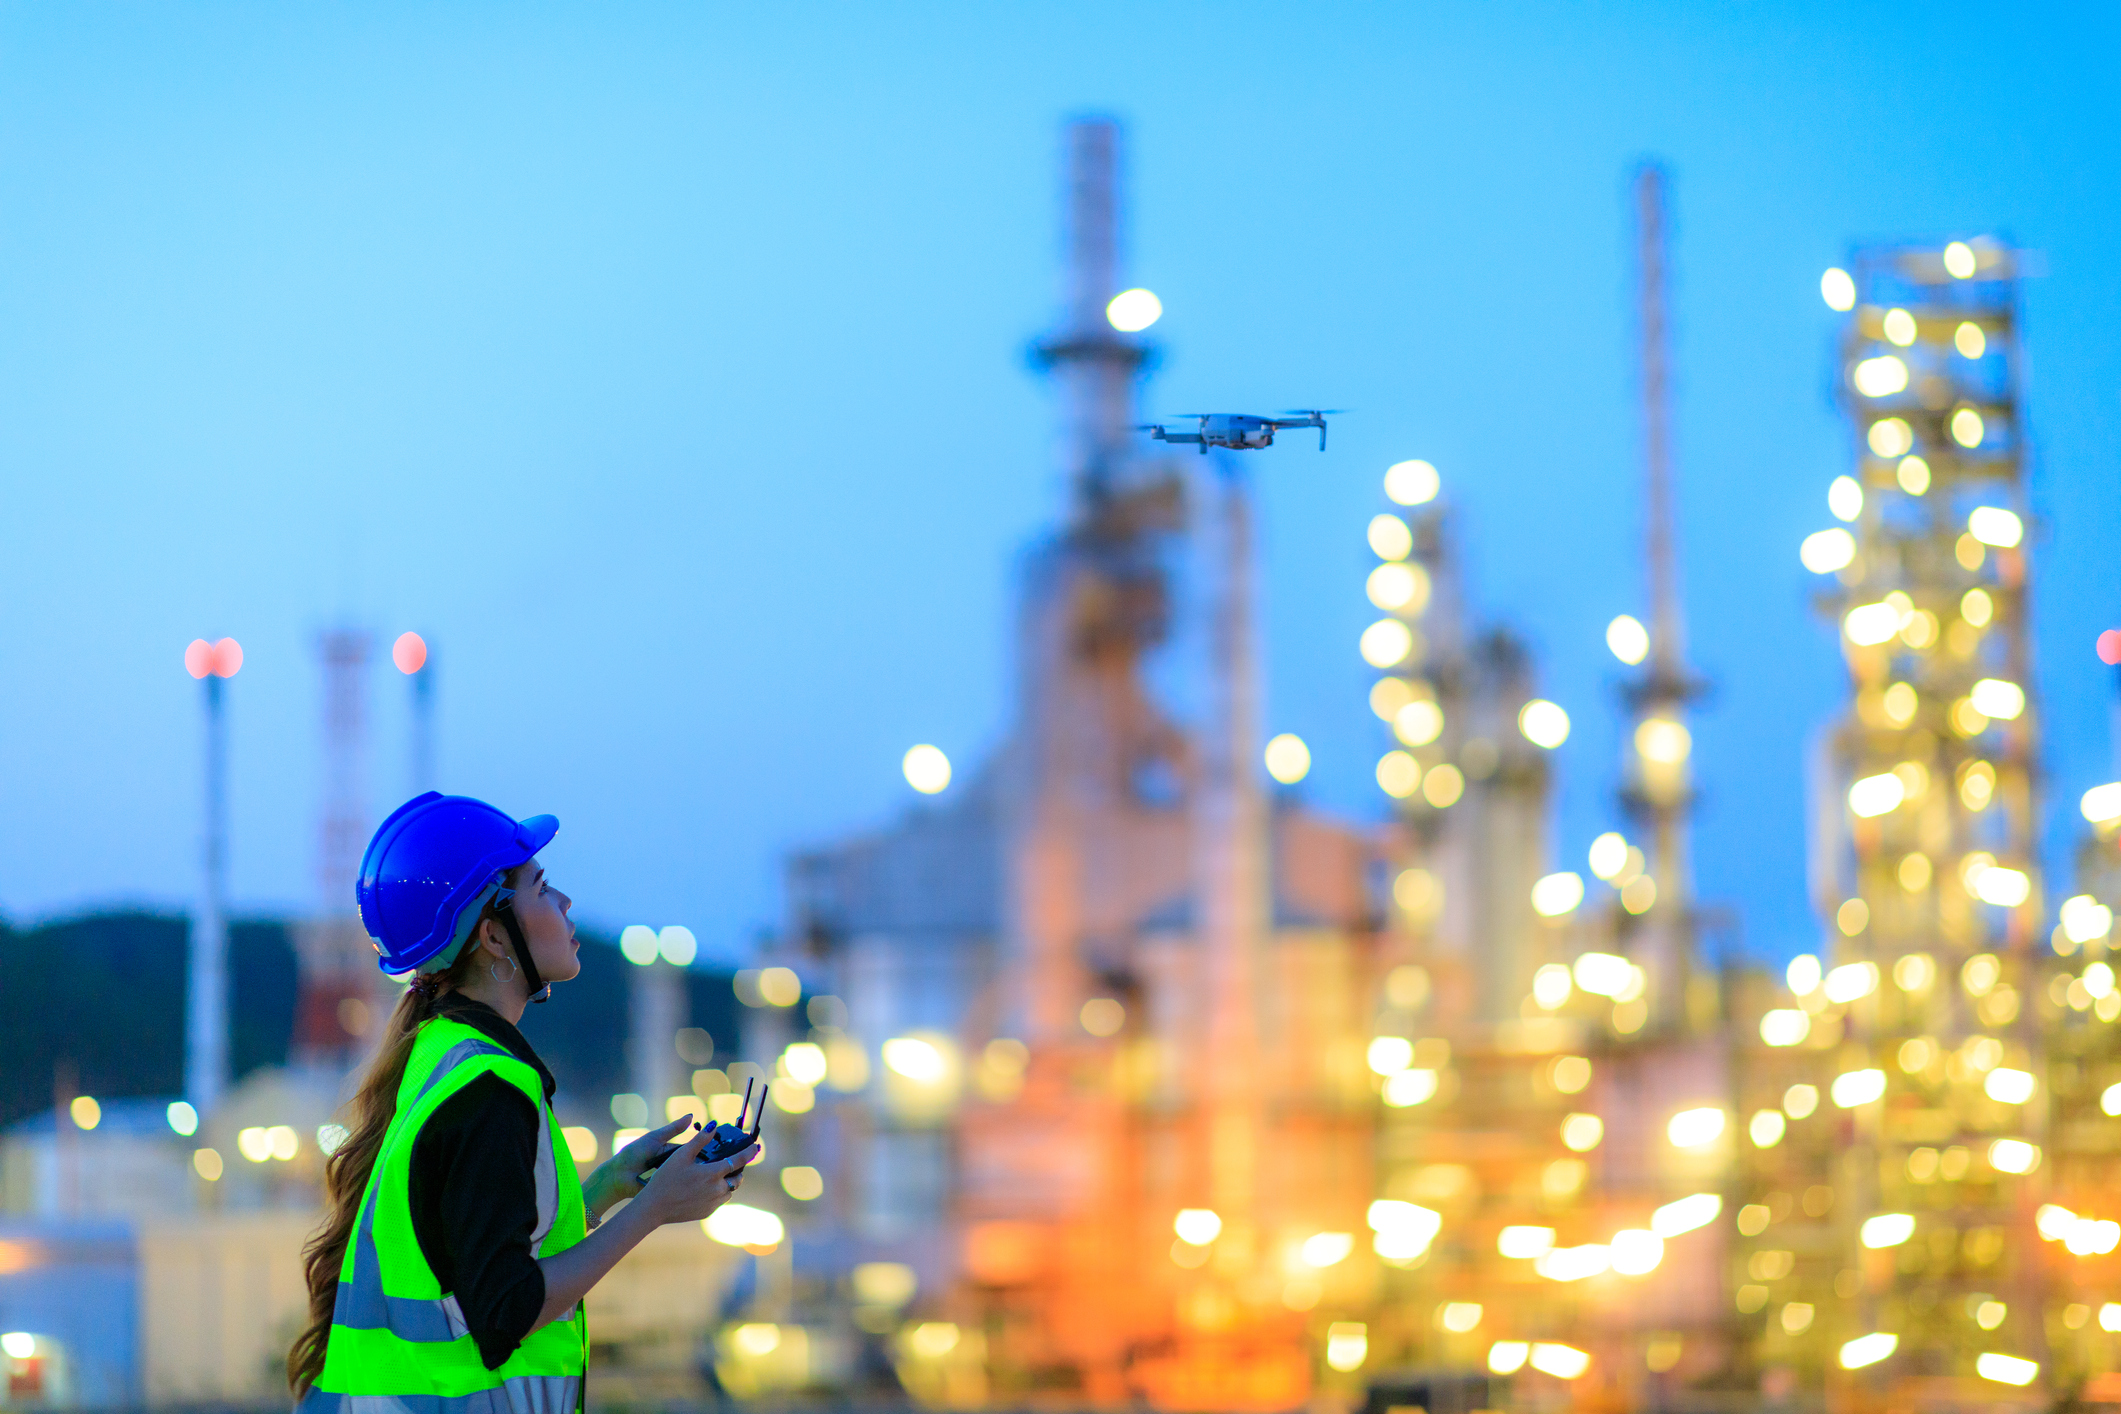 L&W Supply Women Employee Using Drone For Top View Inspection At The Refinery Plant